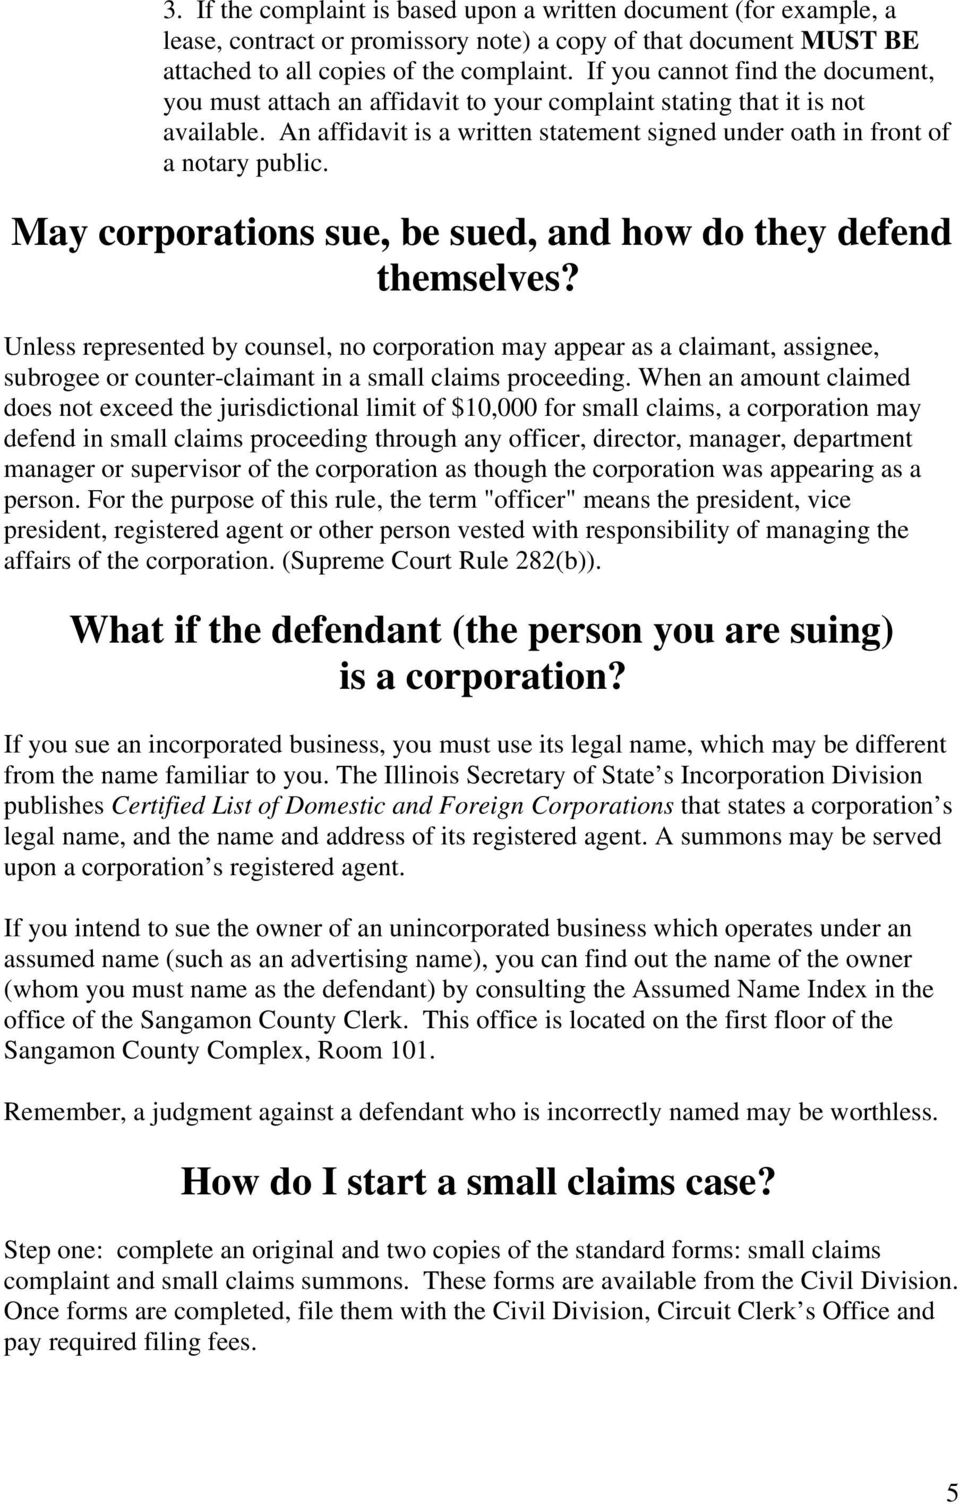 May corporations sue, be sued, and how do they defend themselves?